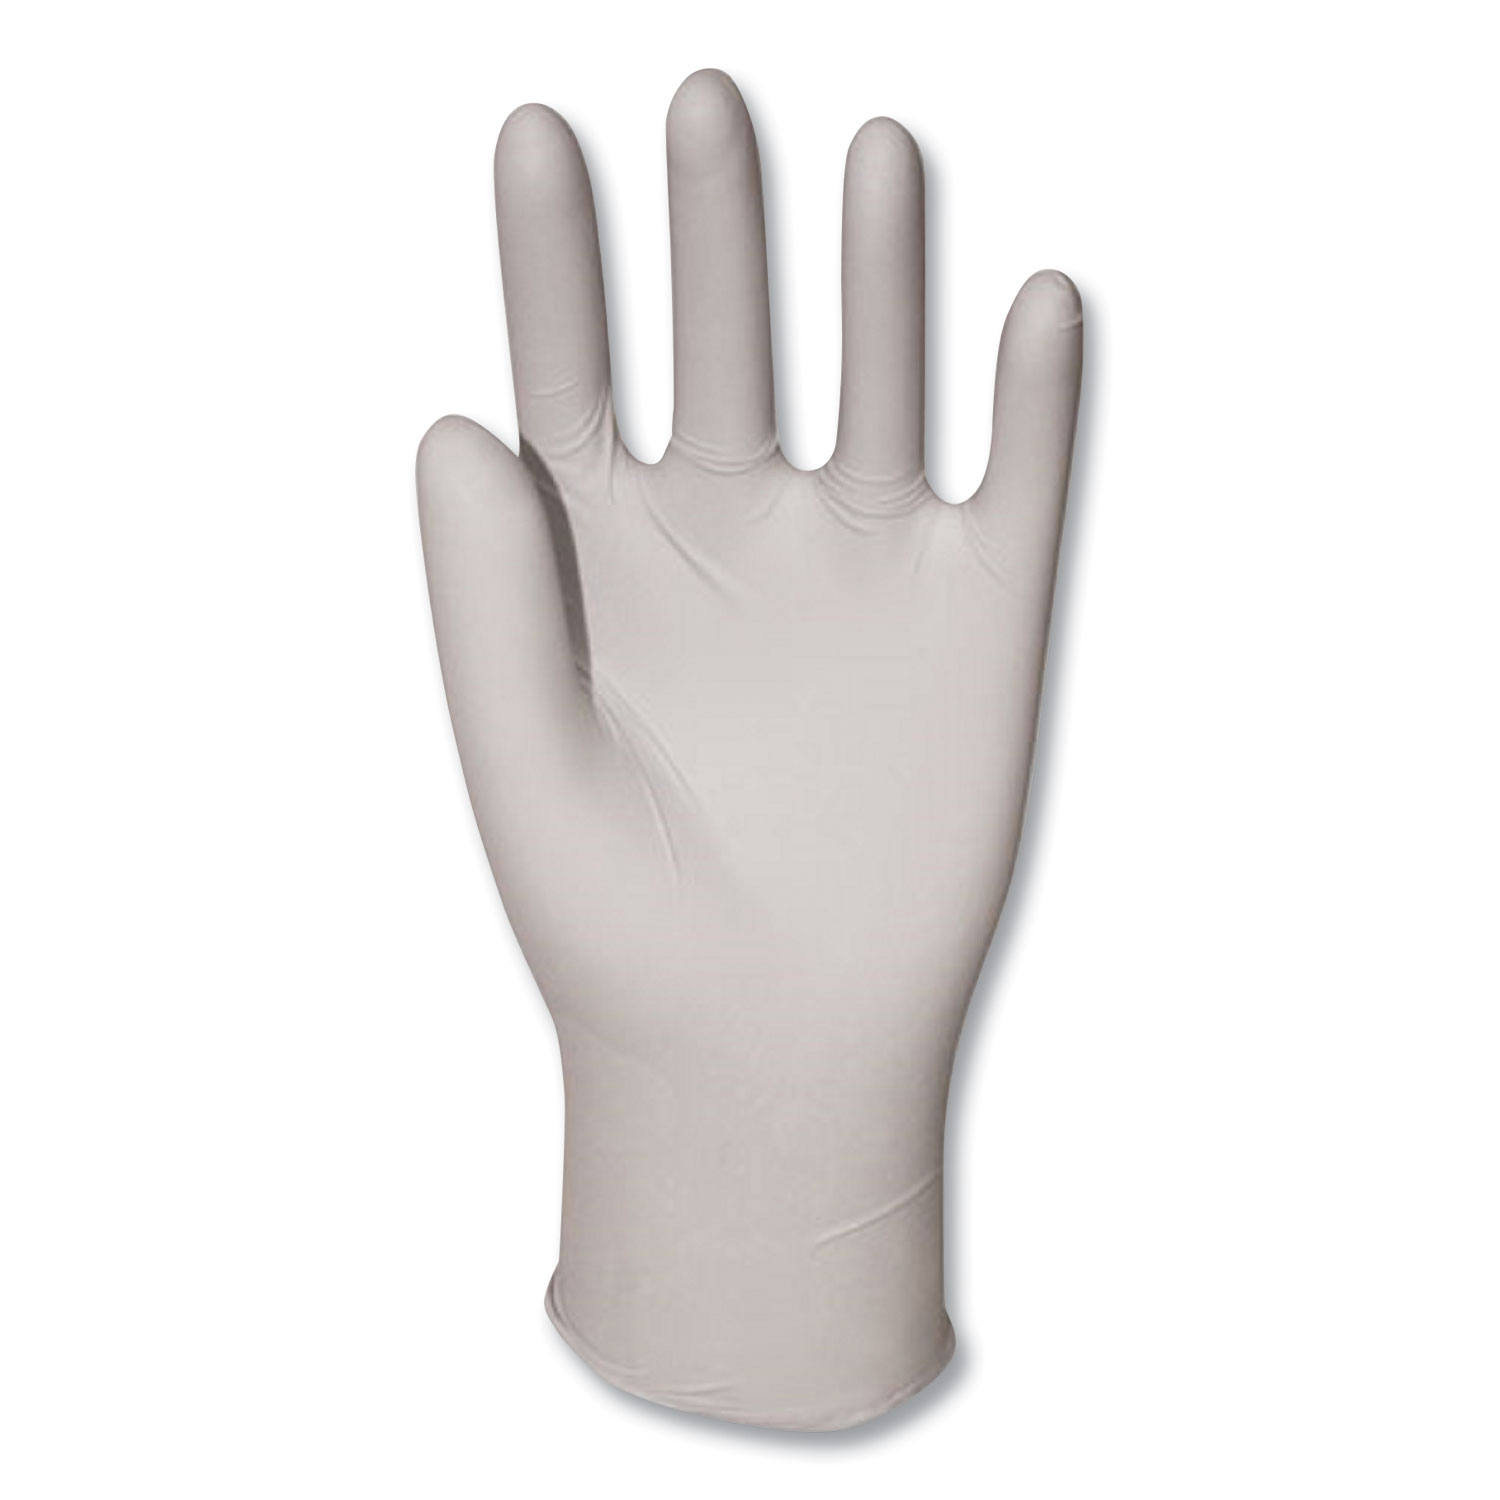  GN1 365LCT General Purpose Vinyl Gloves, Powder-Free, Large, Clear, 1,000/Carton (GN1365LCT) 